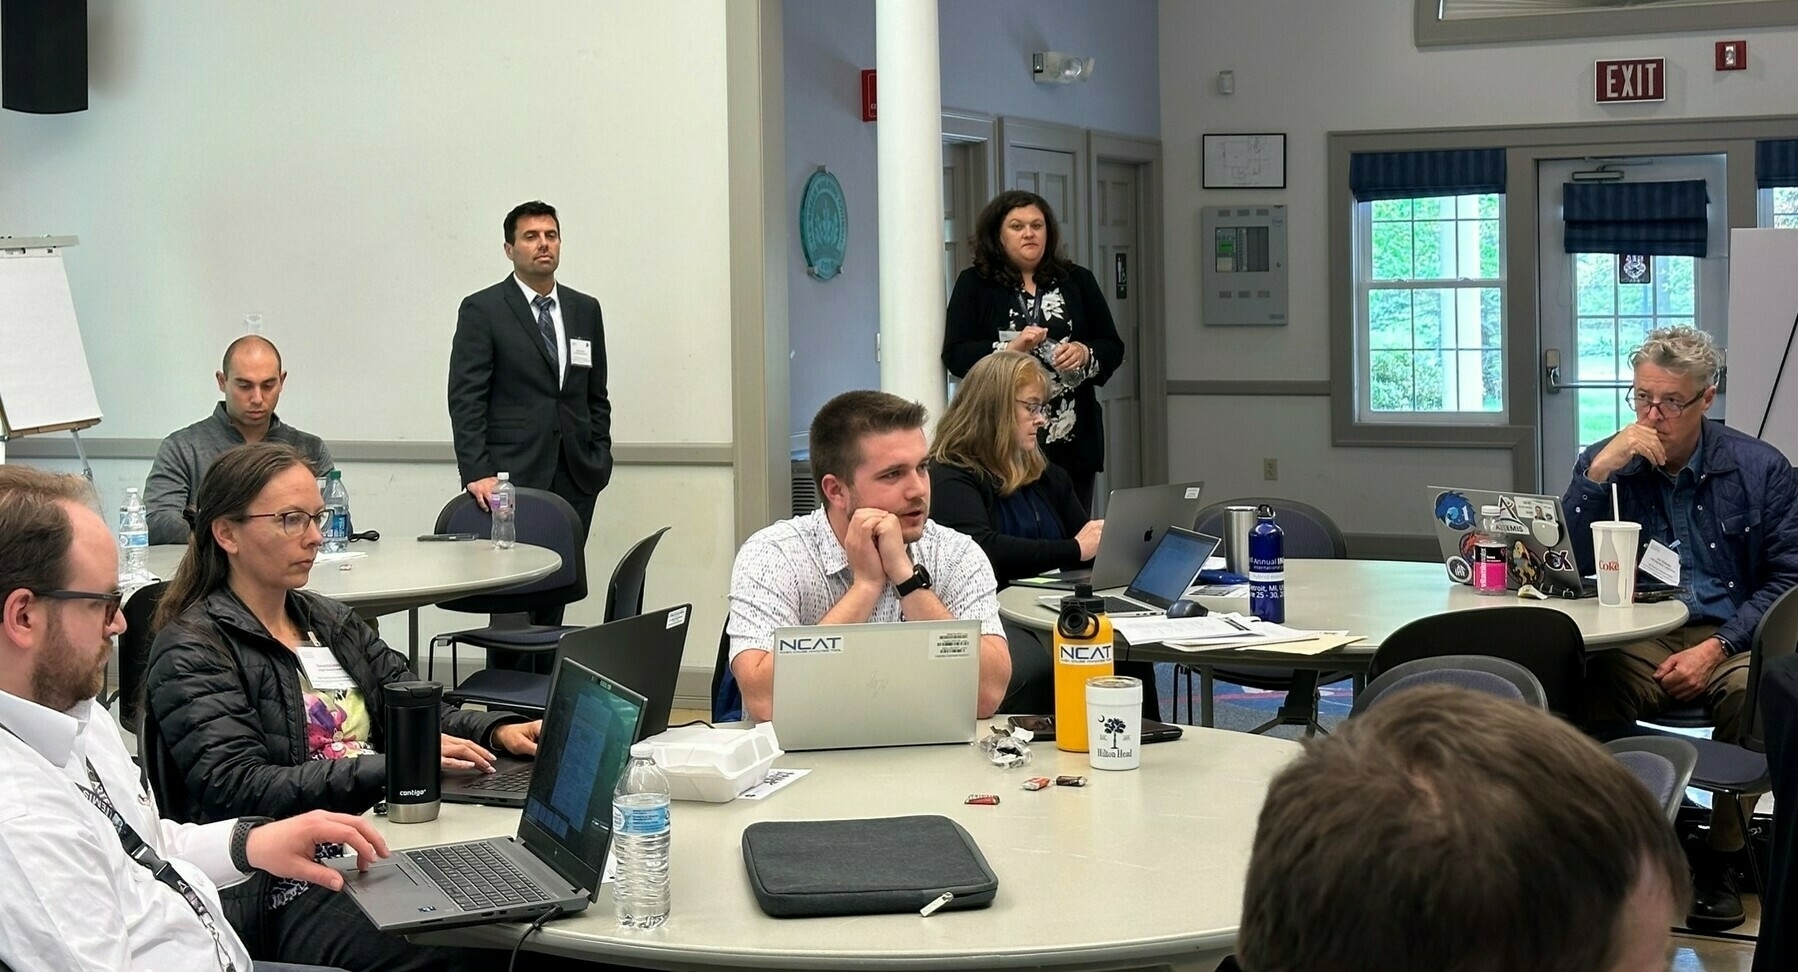 Jake sitting with other nasa agile practitioners in a conference room